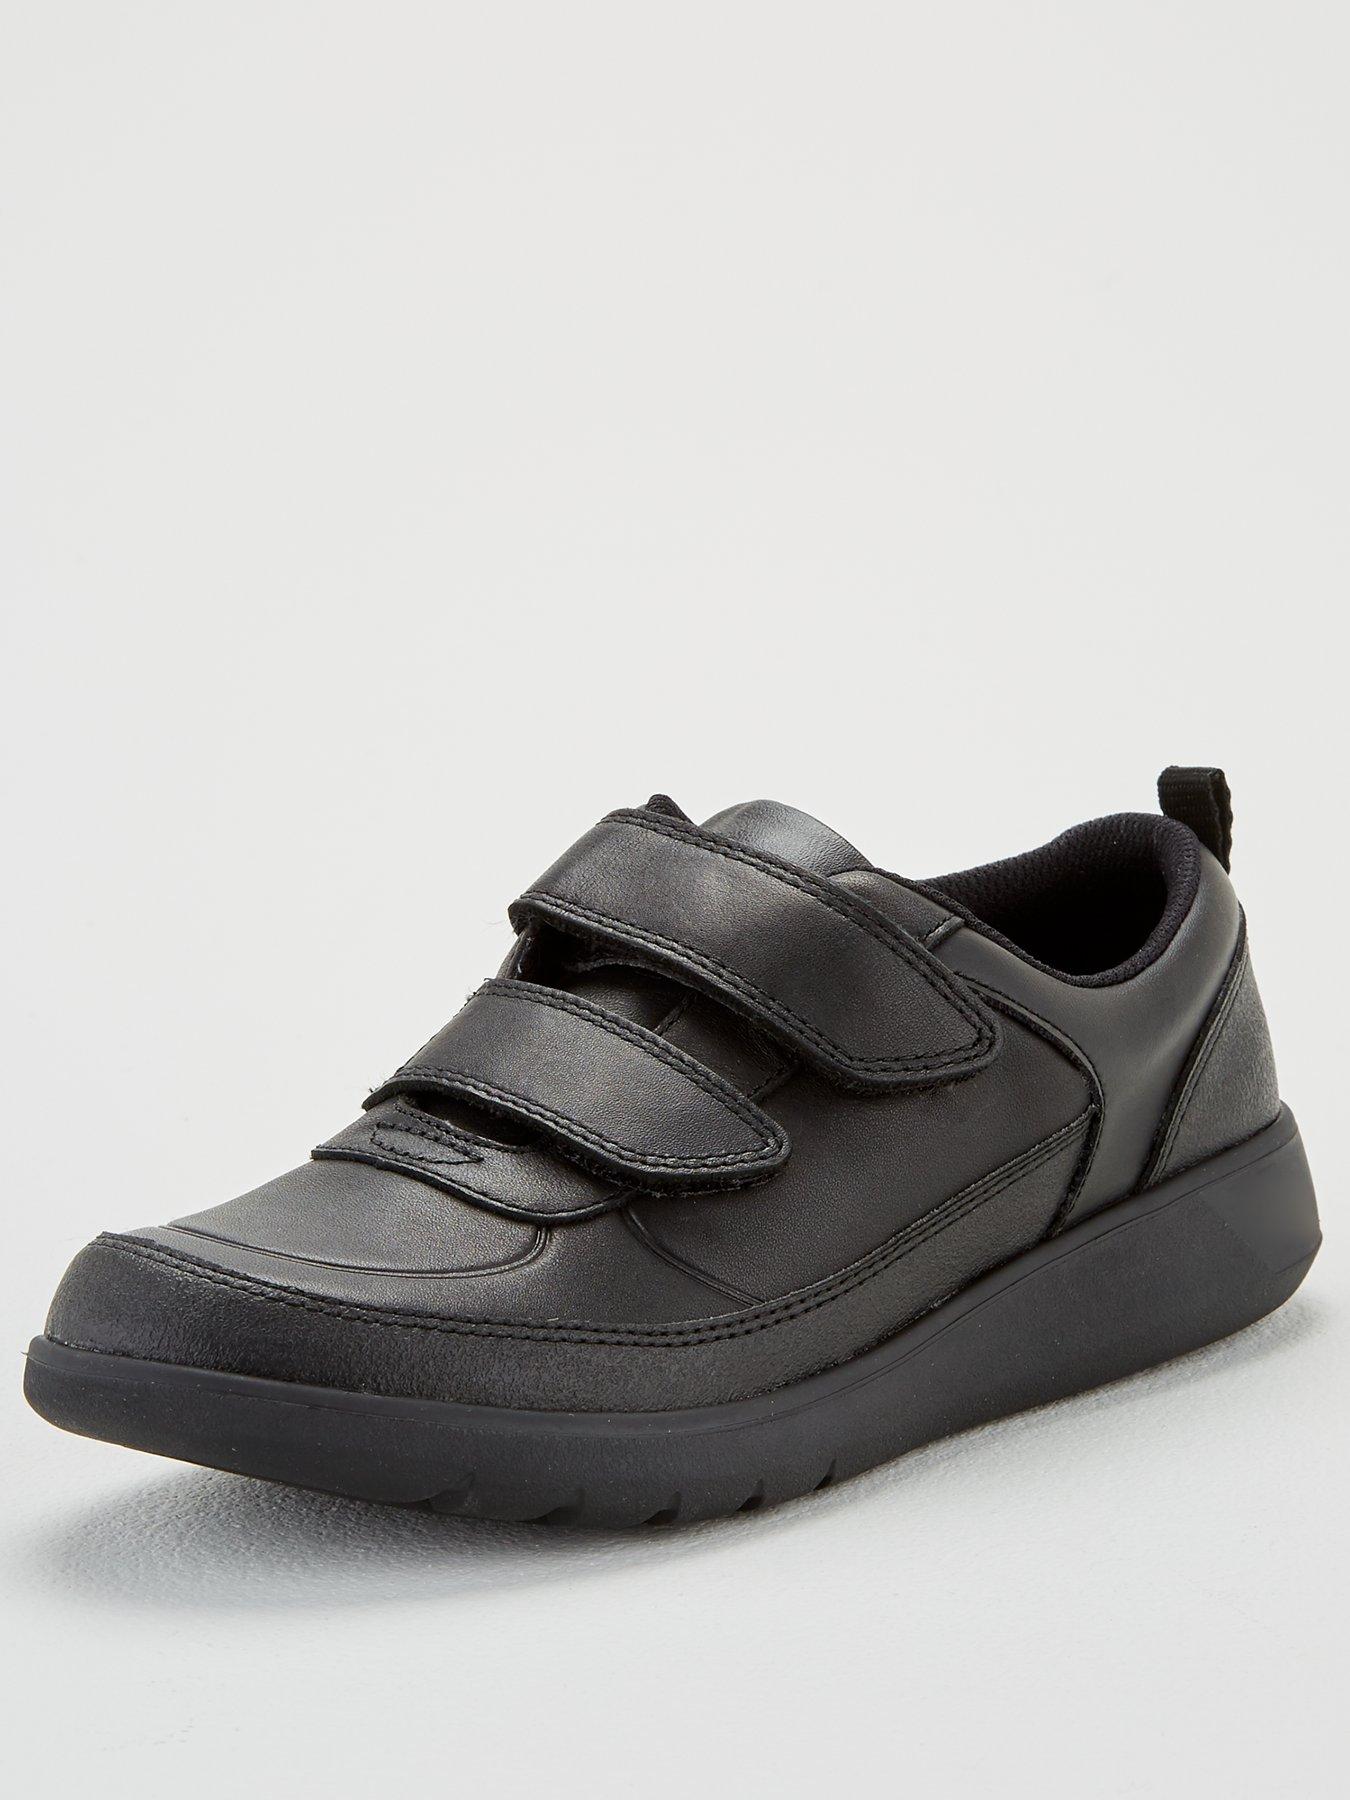 Boys Youth Scape School Shoes - Black Leather | Very Ireland